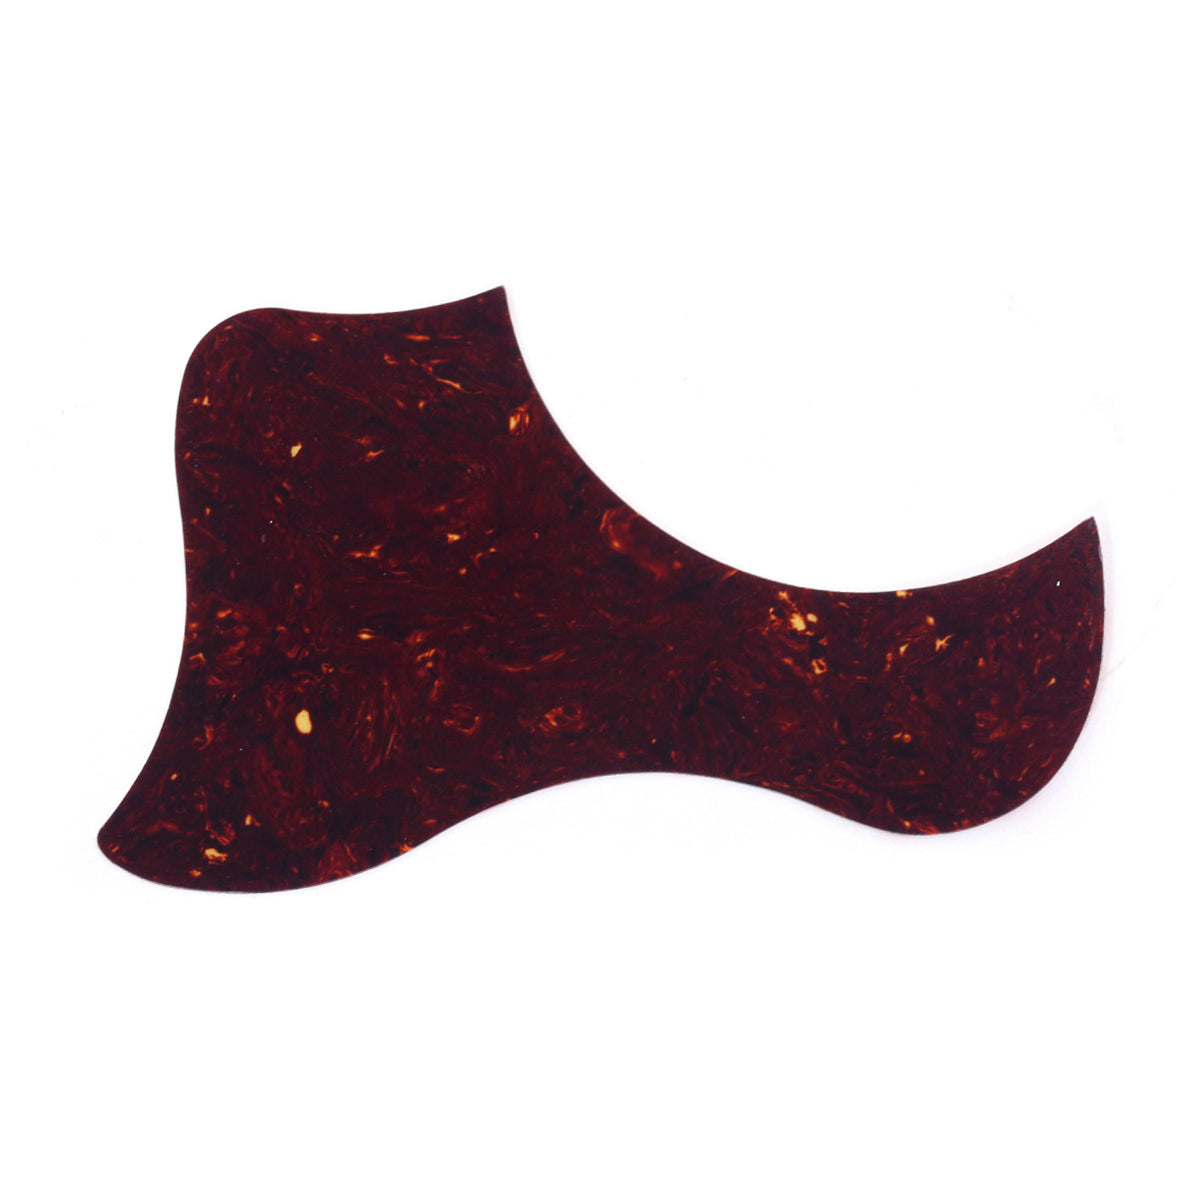 Musiclily Acoustic Guitar Self-adhesive Pickguard  for Taylor Style Guitar,Tortoise Shell